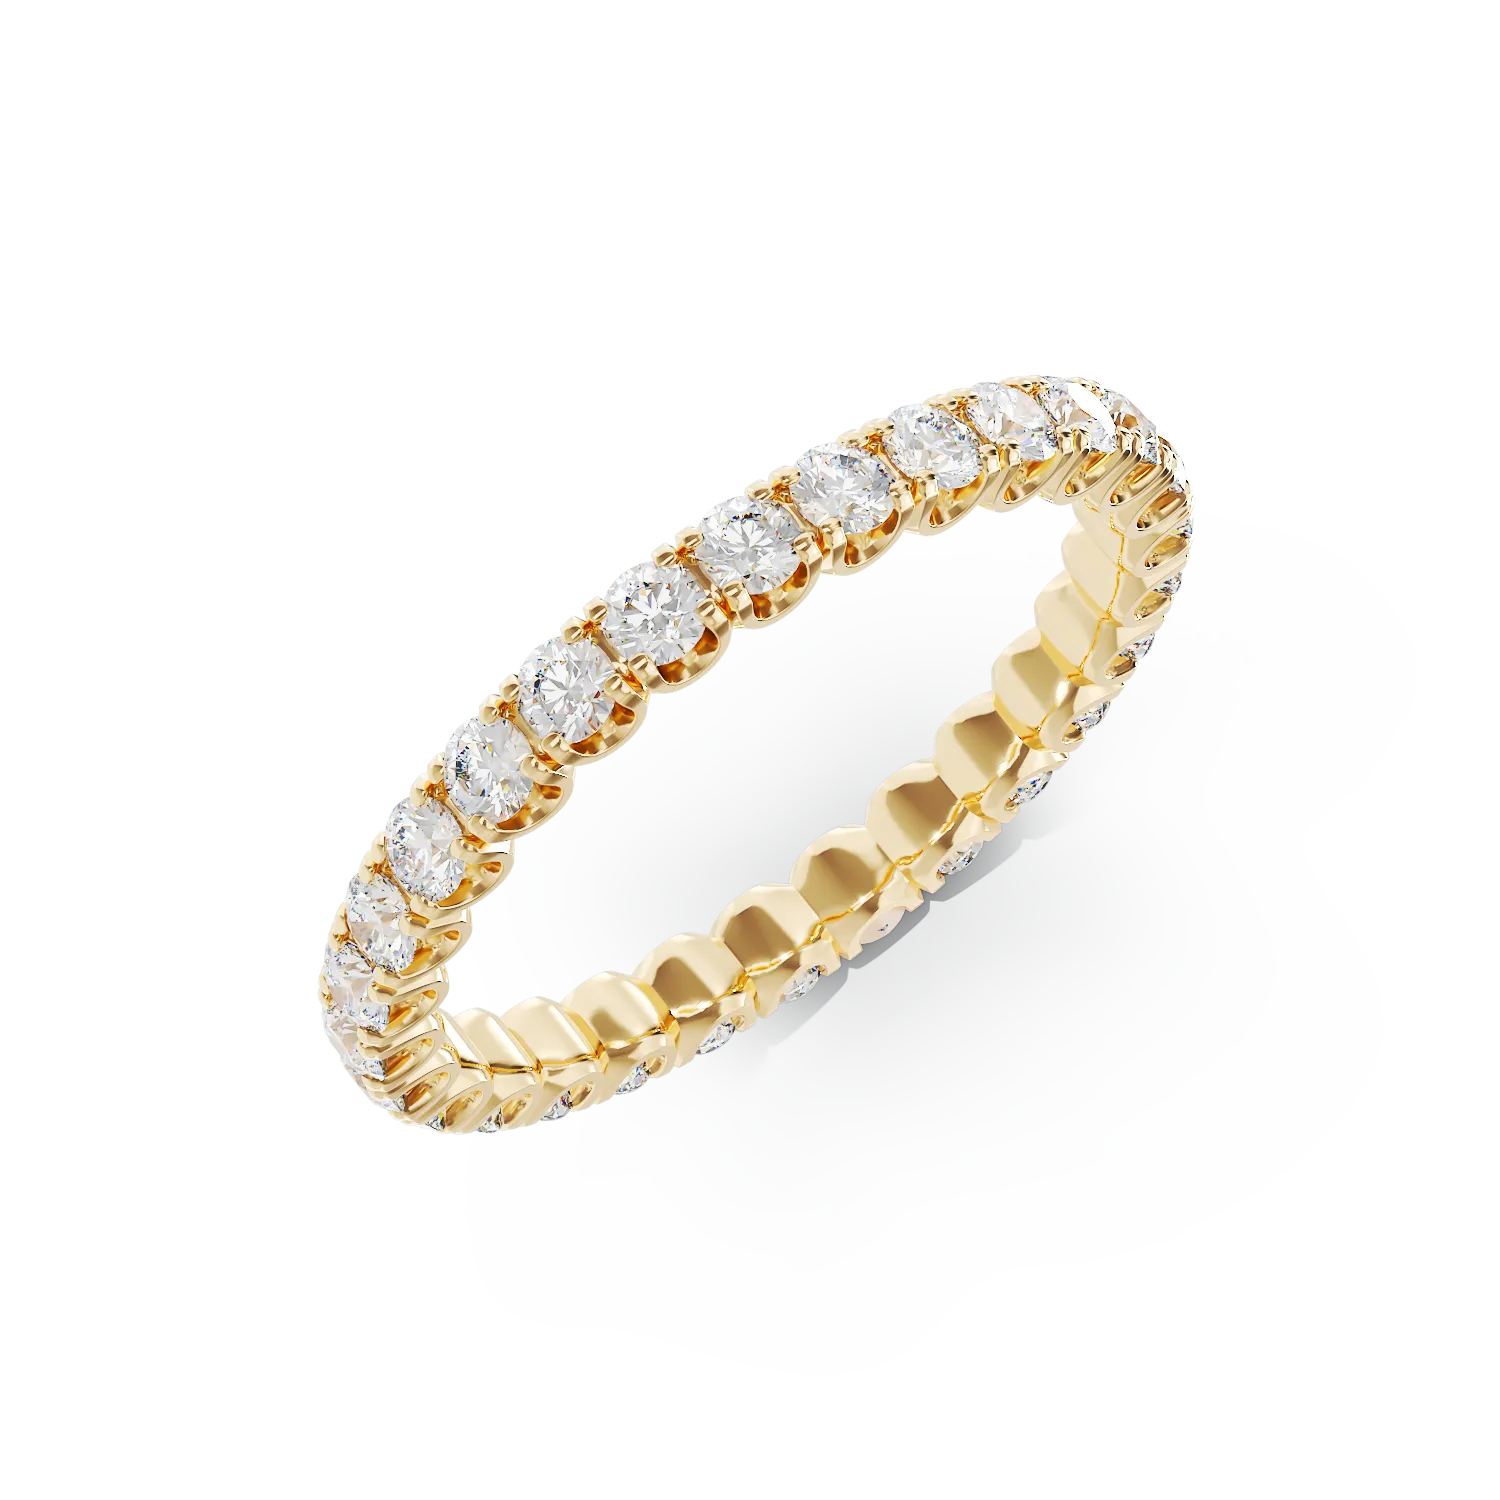 Eternity ring in yellow gold with 1ct diamonds